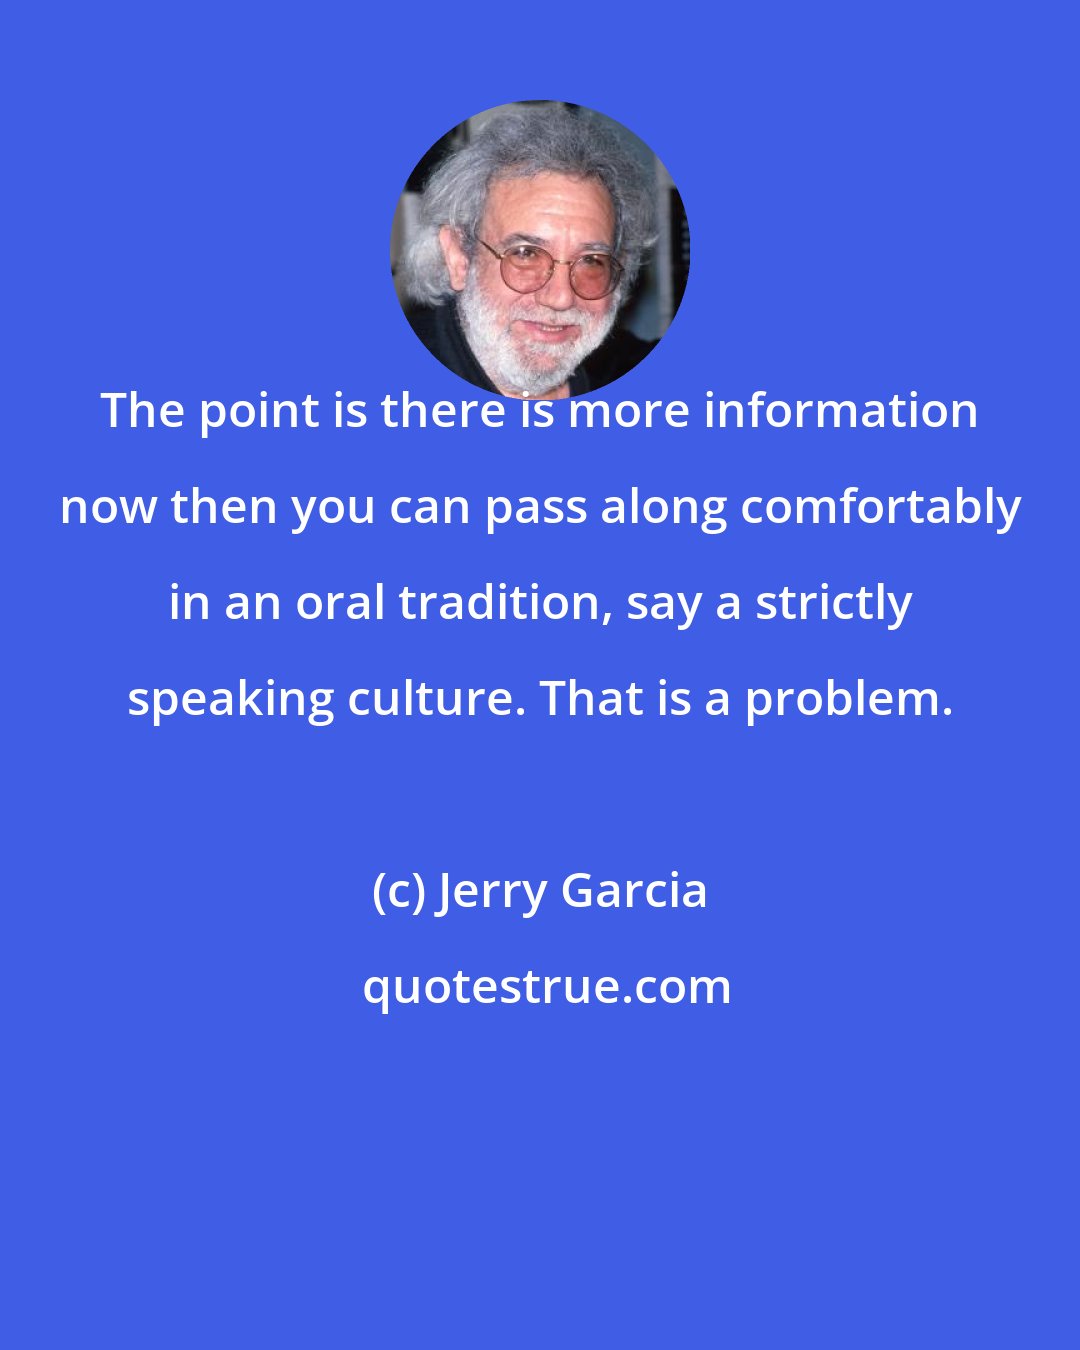 Jerry Garcia: The point is there is more information now then you can pass along comfortably in an oral tradition, say a strictly speaking culture. That is a problem.